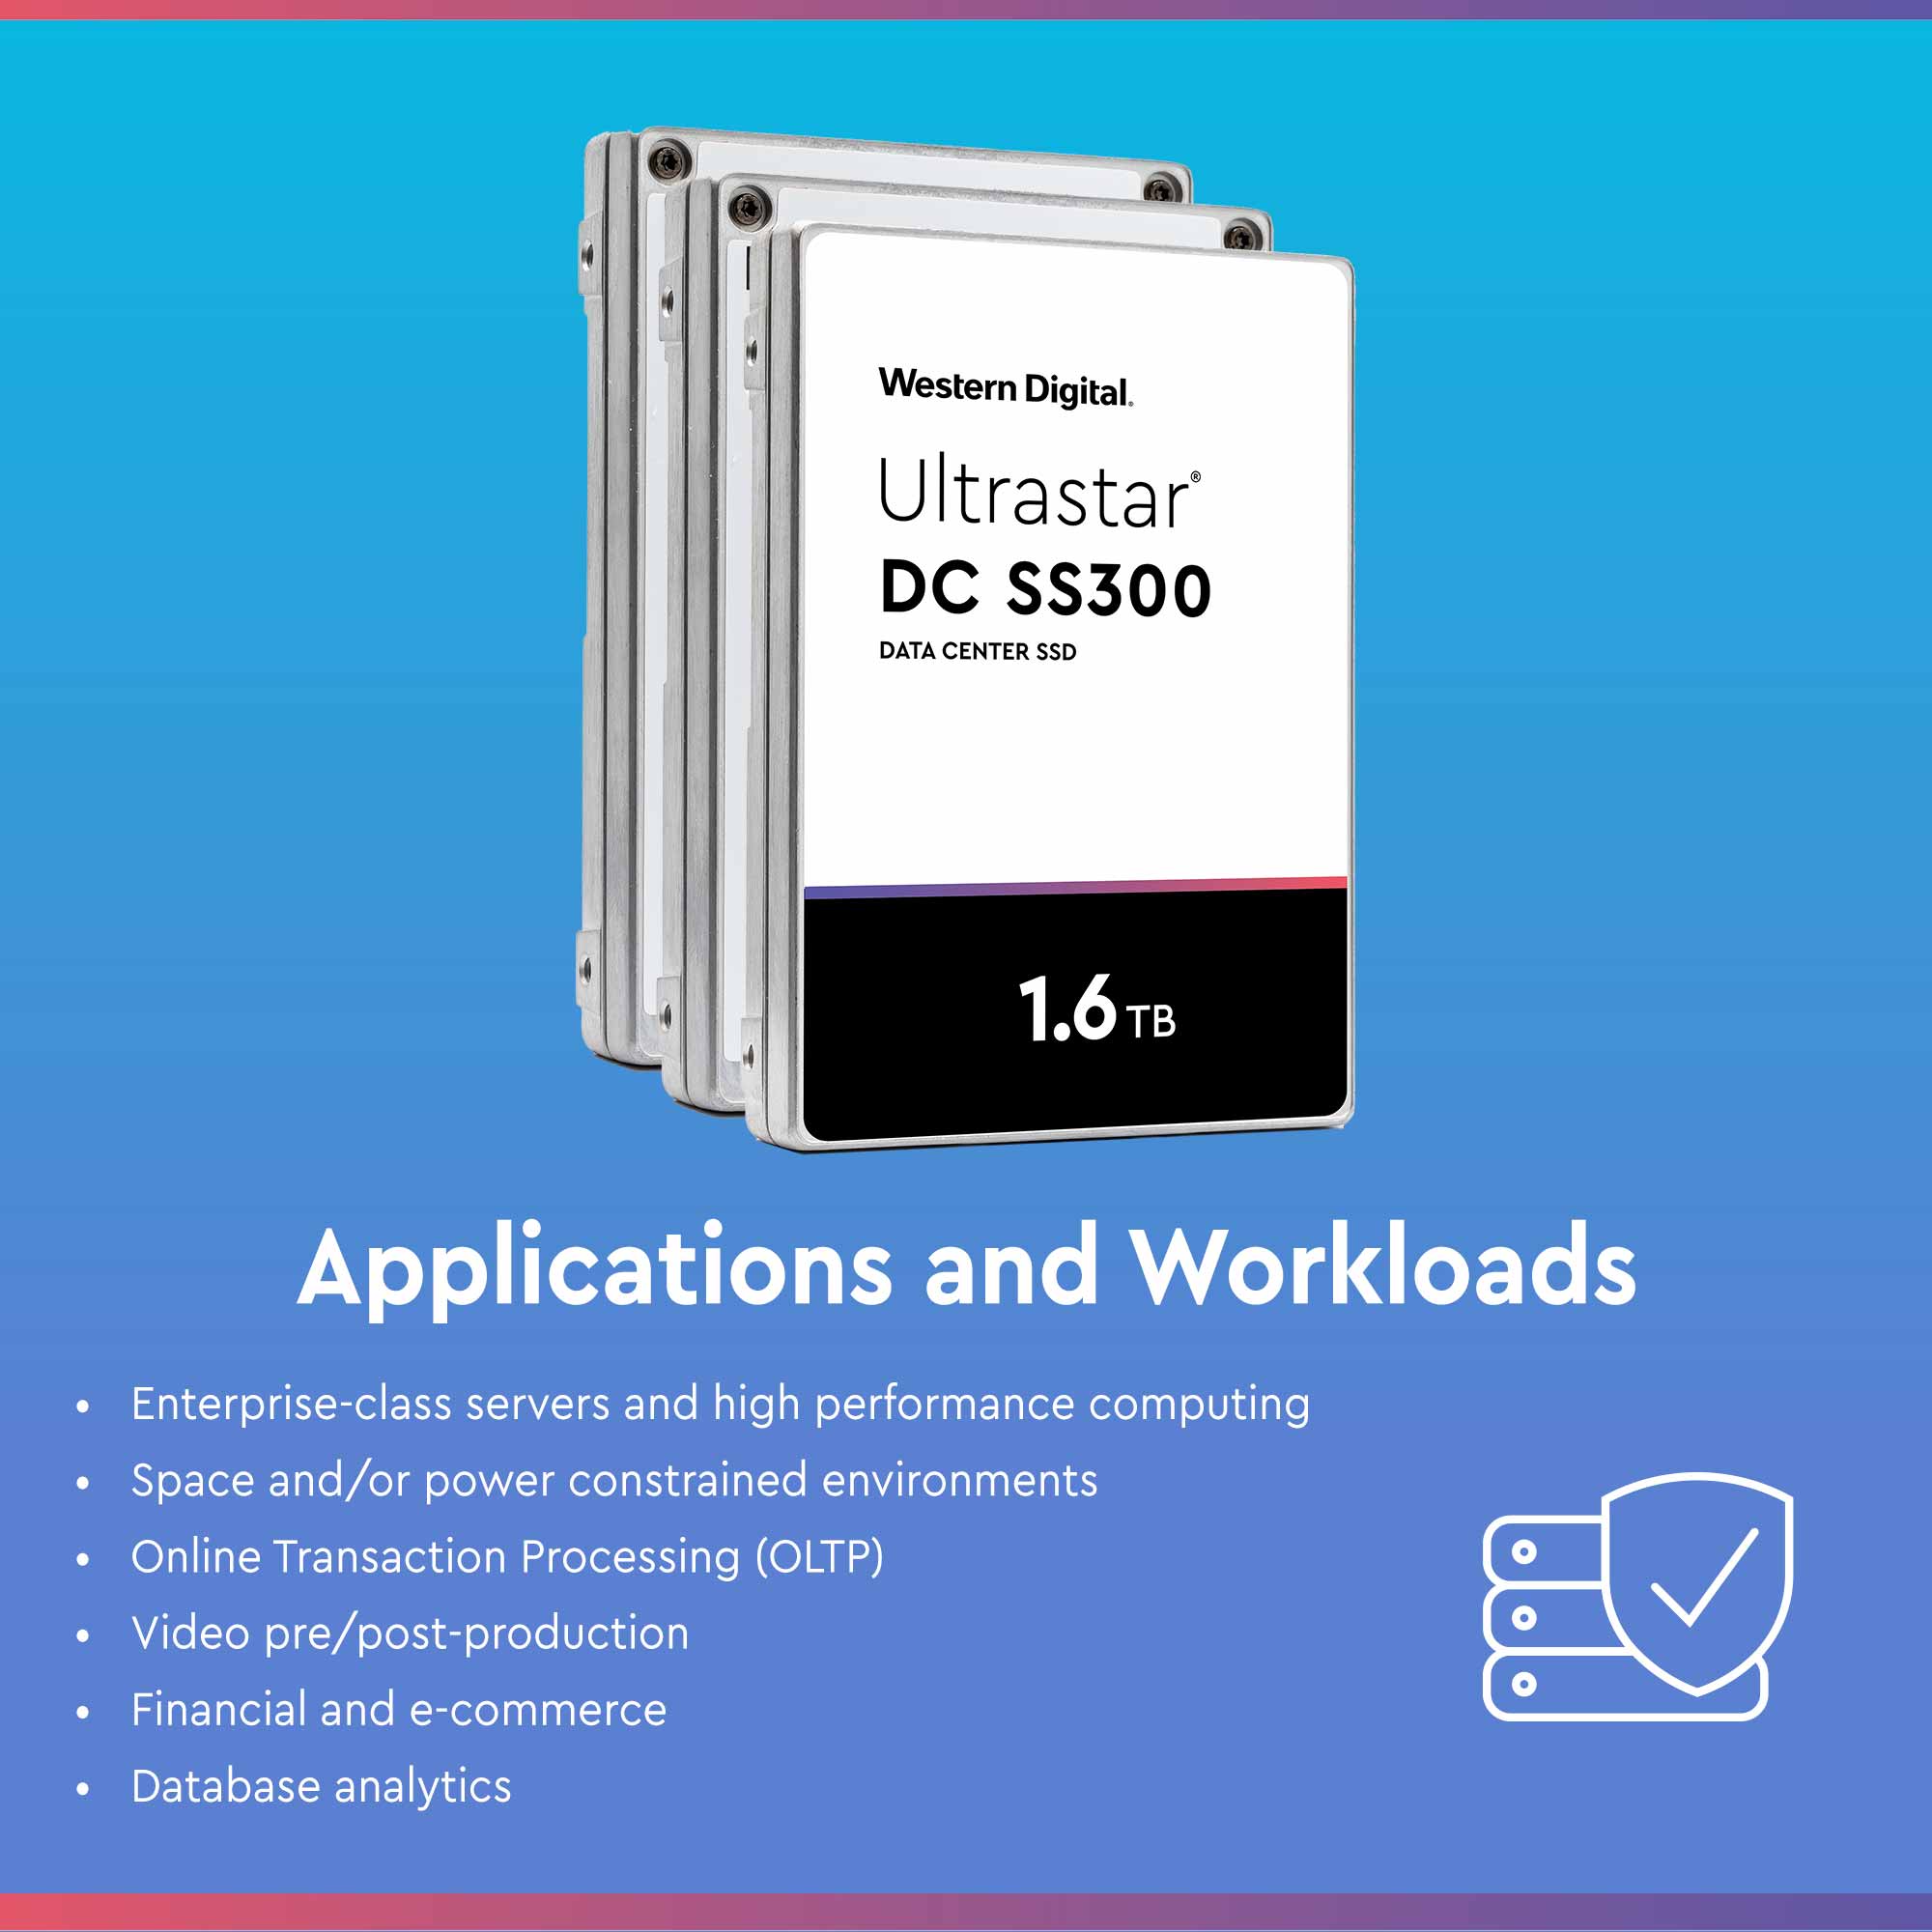 Western Digital Ultrastar DC SS300 HUSMM3216ASS204 1.6TB SAS 12Gb/s 512e 2.5in Solid State Drive - Applications and Workloads